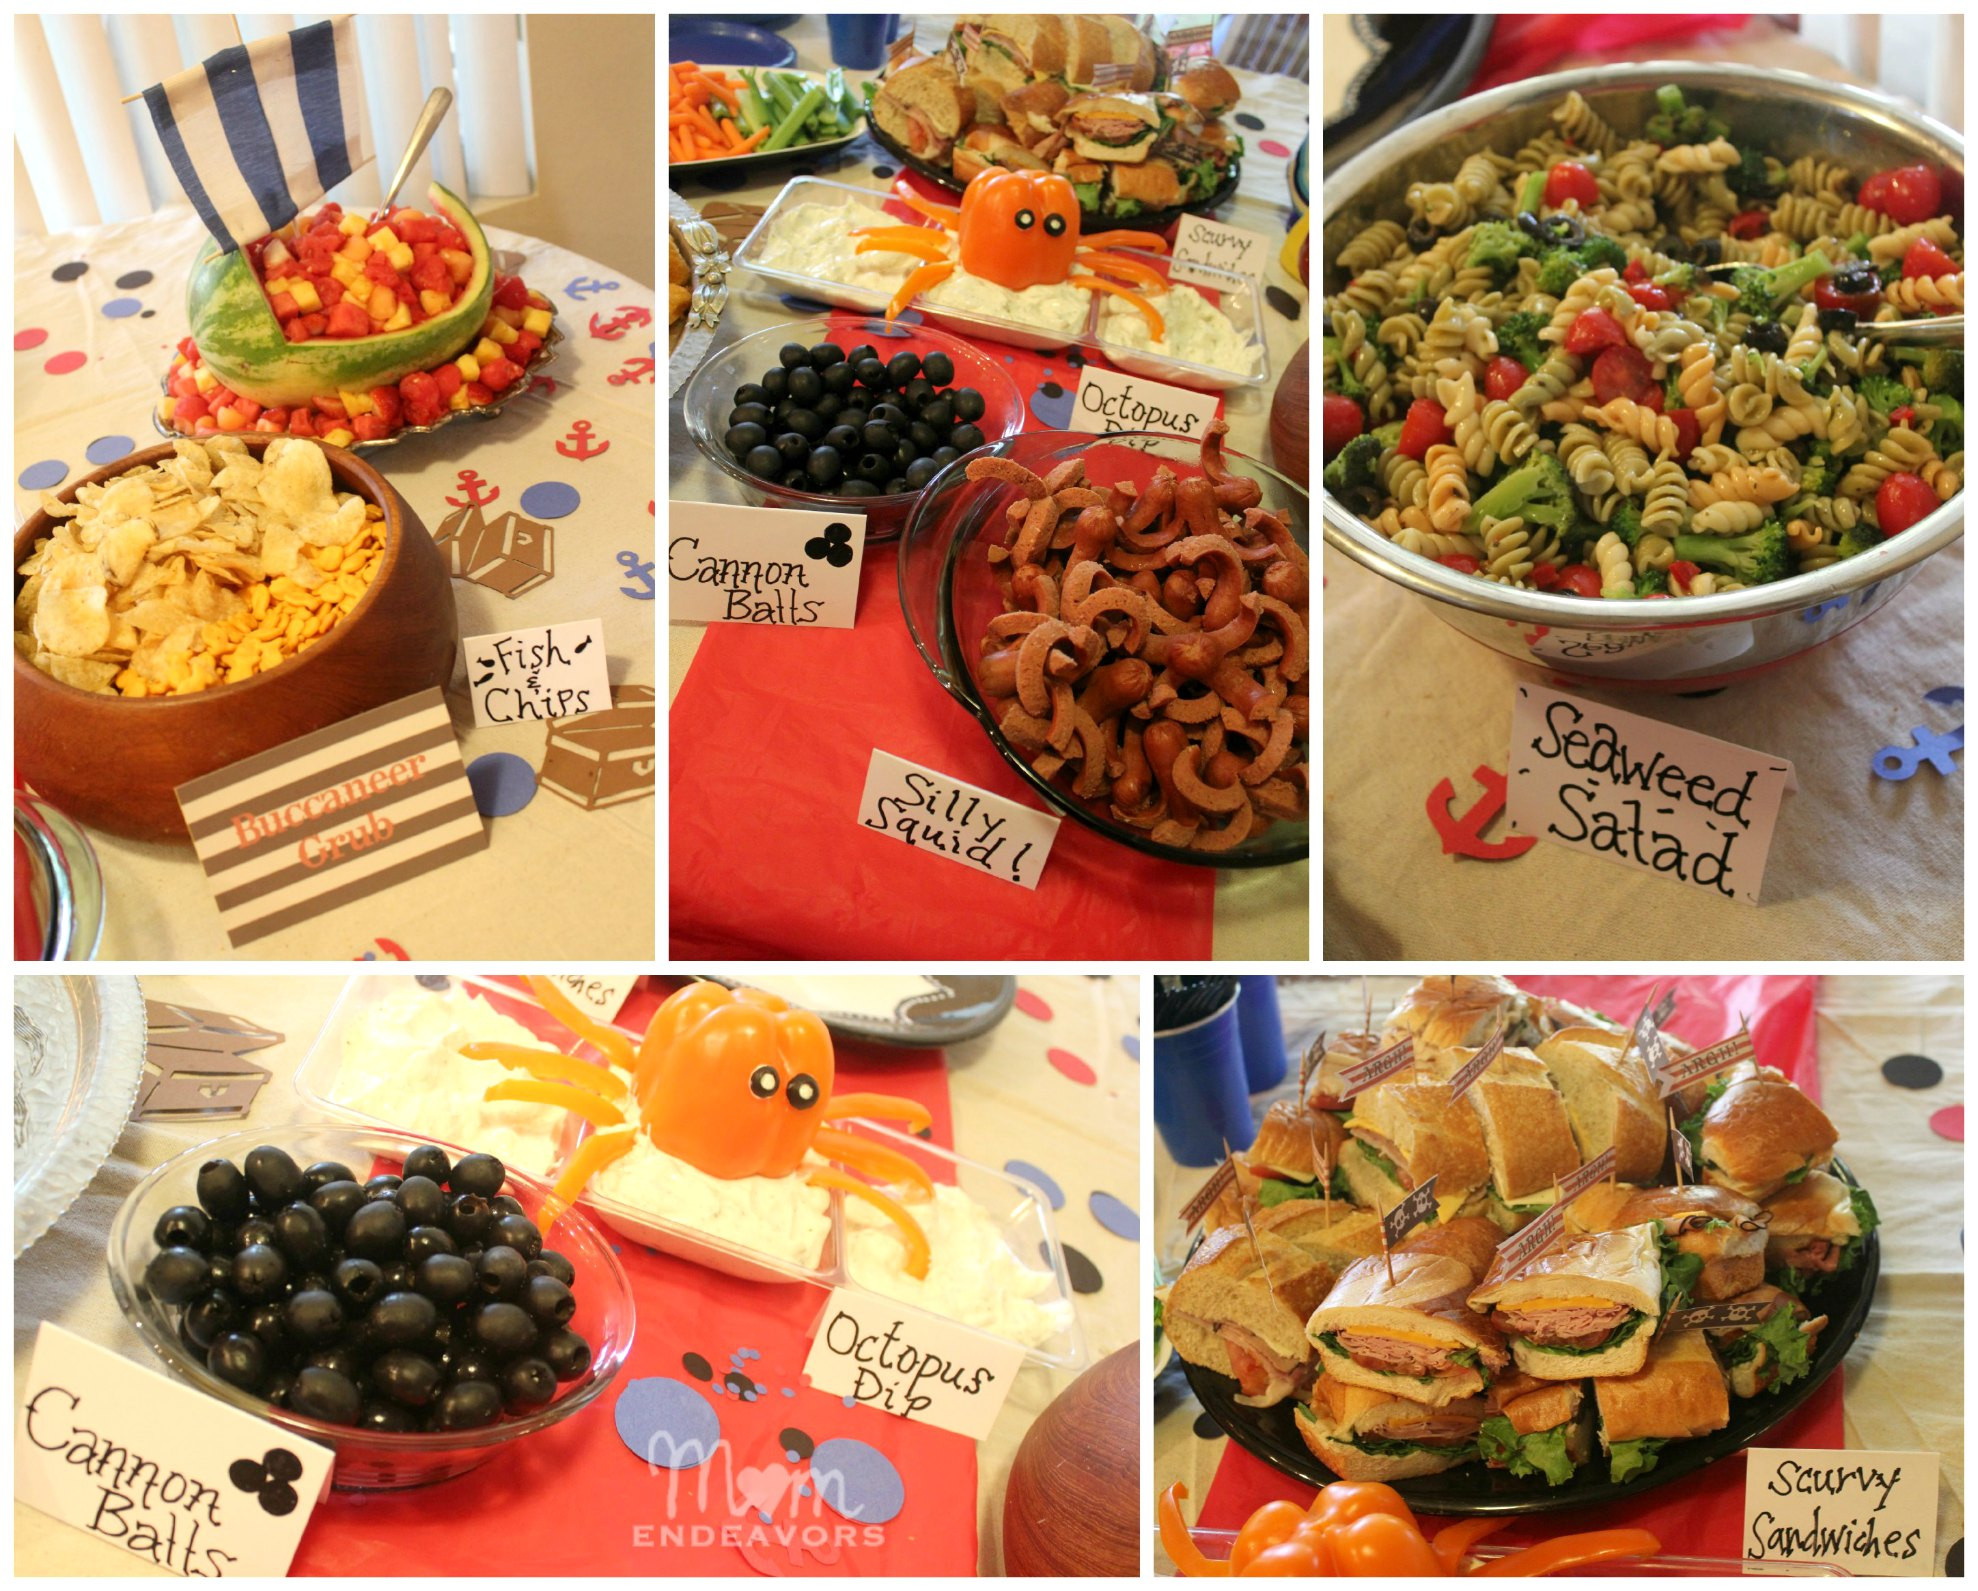 Pirate Birthday Party Food Ideas
 Jake and the Never Land Pirates Birthday Party Food